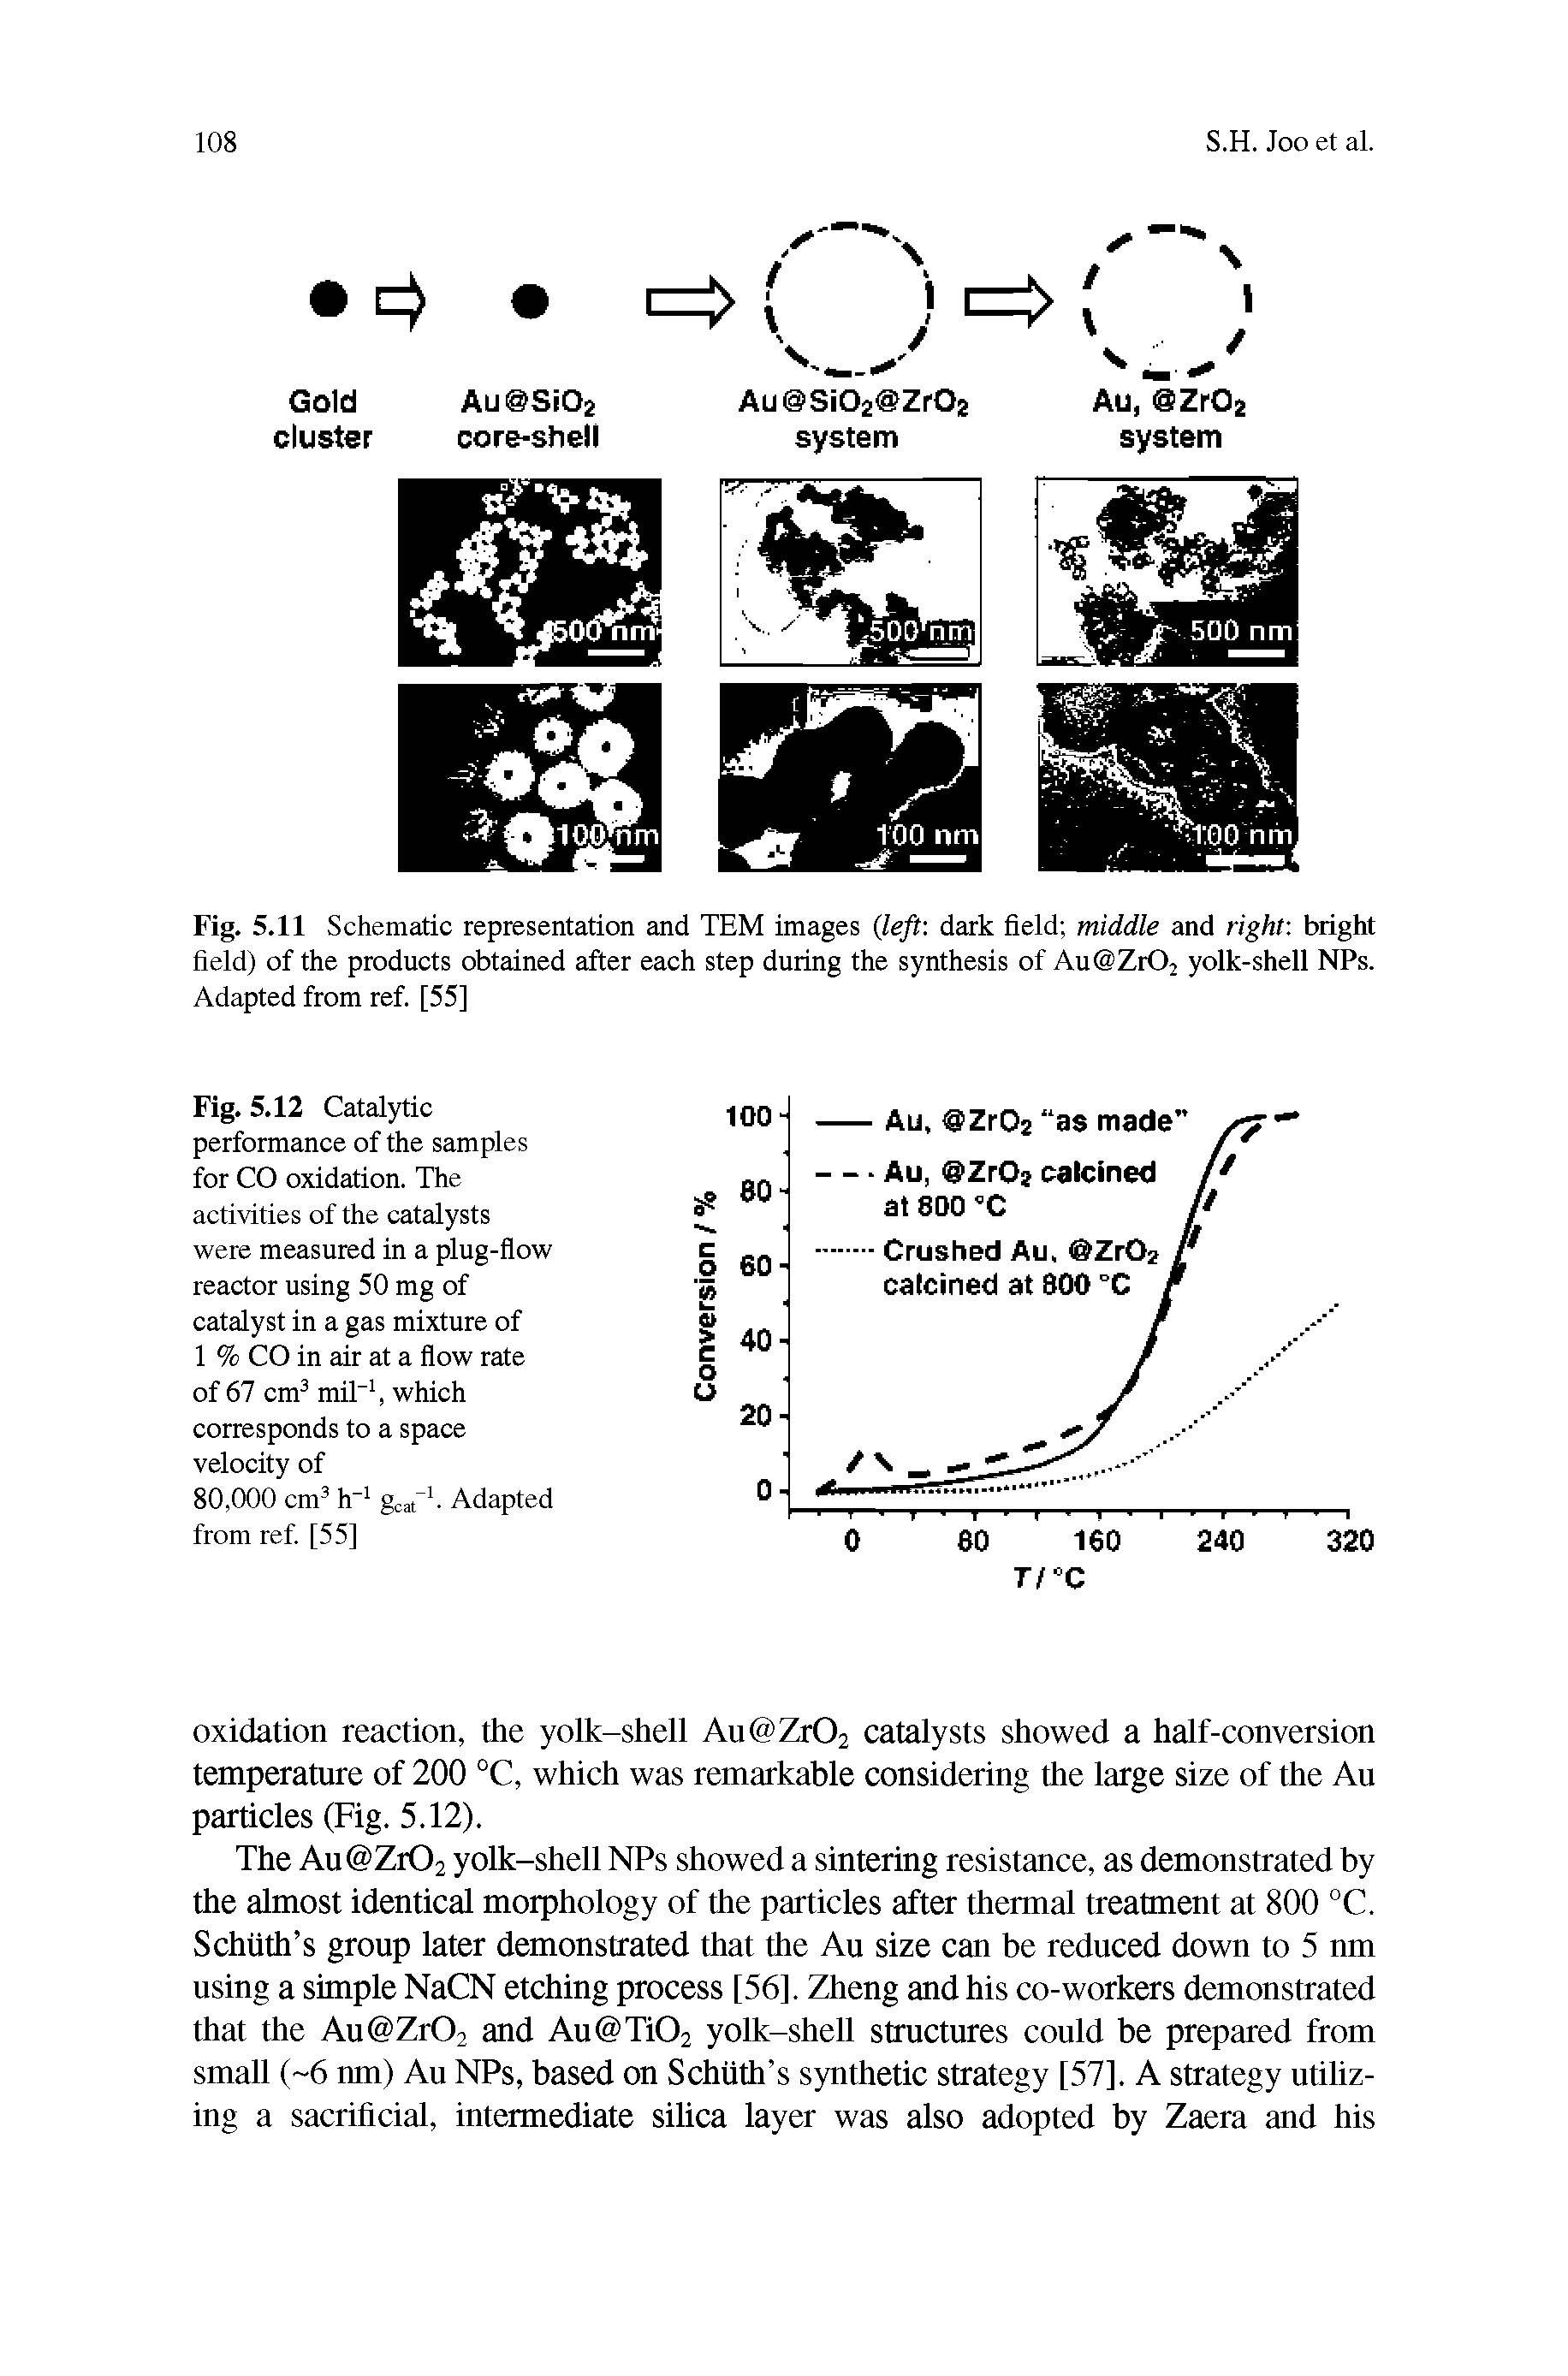 Fig. 5.11 Schematic representation and TEM images (left dark field middle and right bright field) of the products obtained after each step during the synthesis of Aut ZtOj yolk-shell NPs. Adapted from ref. [55]...